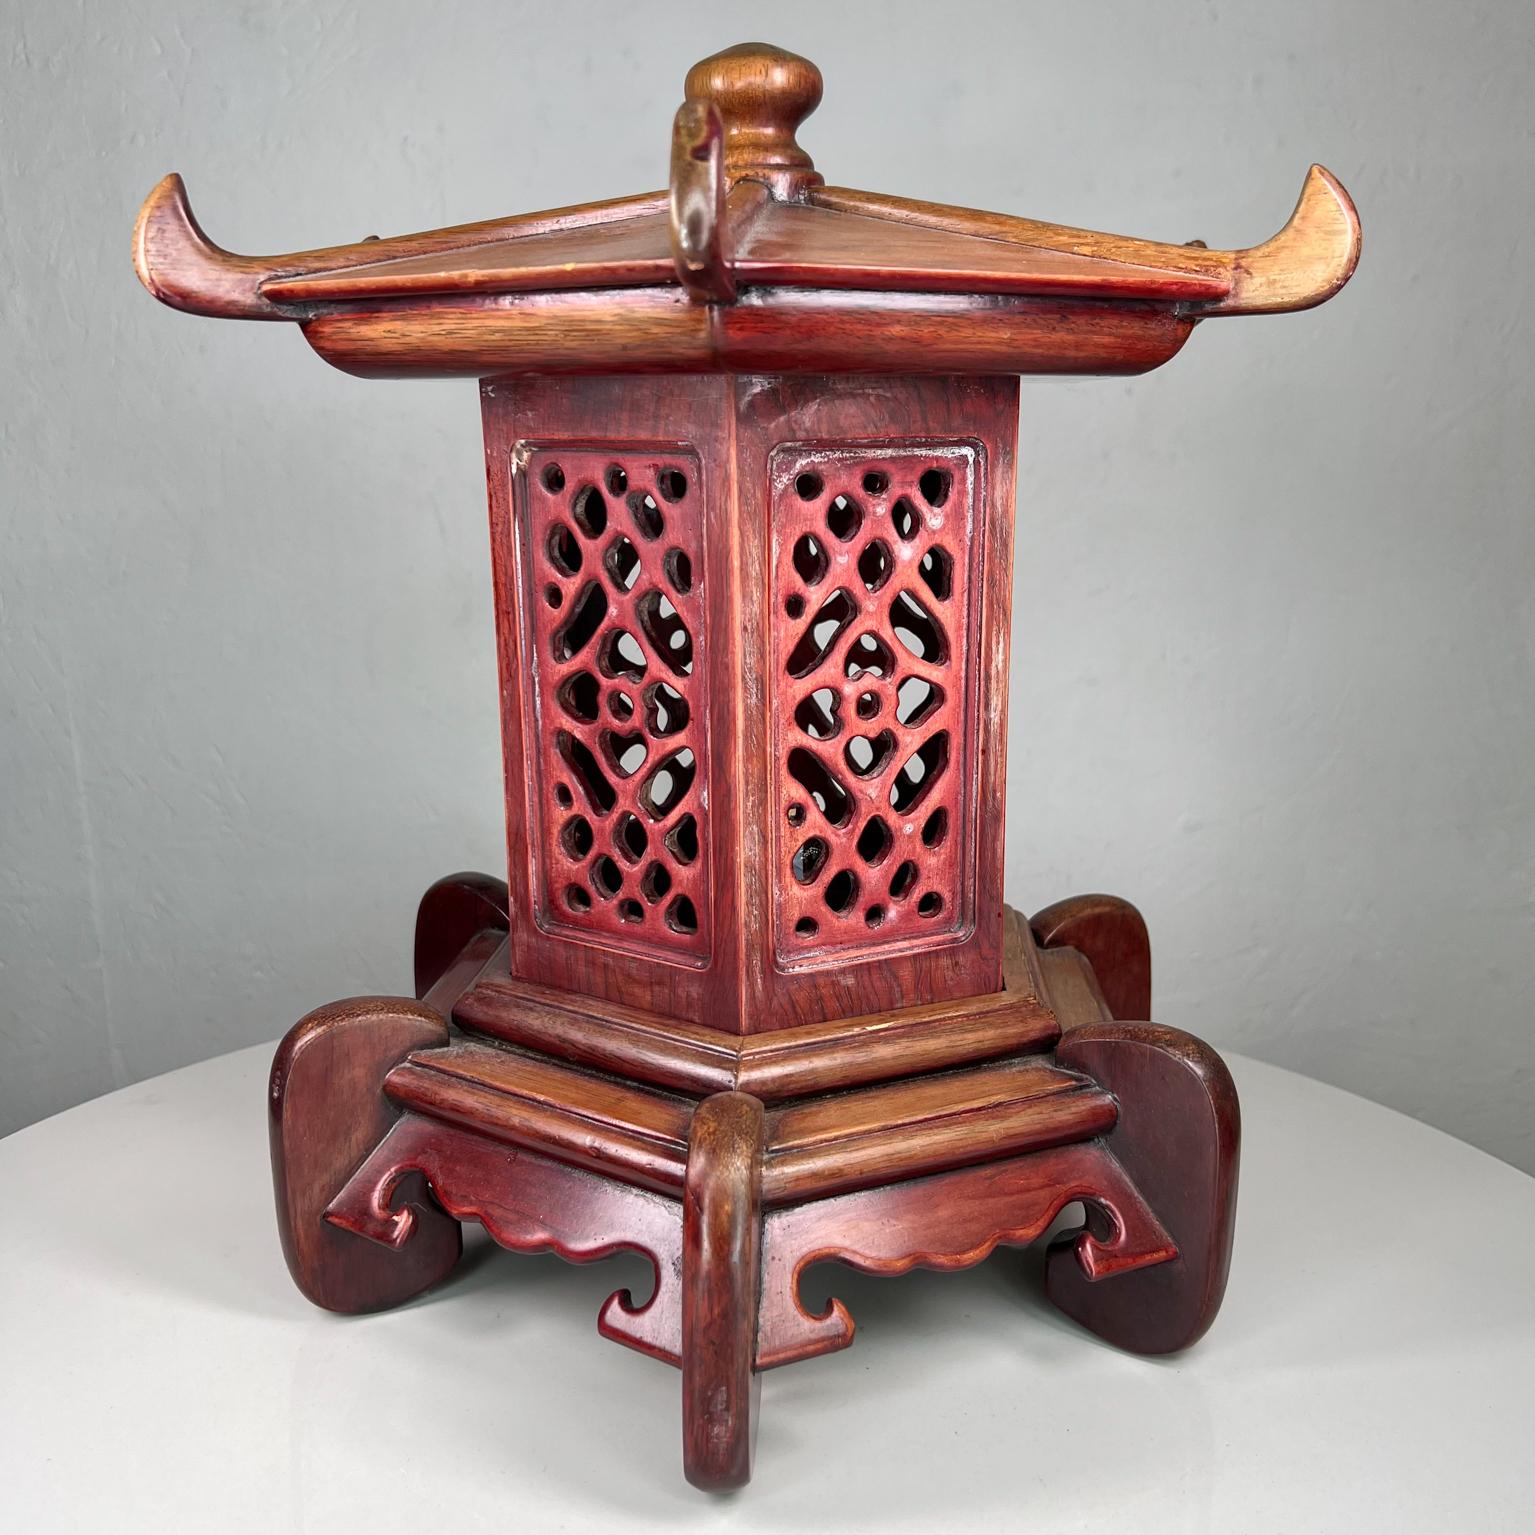 1950s Stunning Vintage Pagoda Table Lamp Intricate Handcrafted Wood For Sale 2